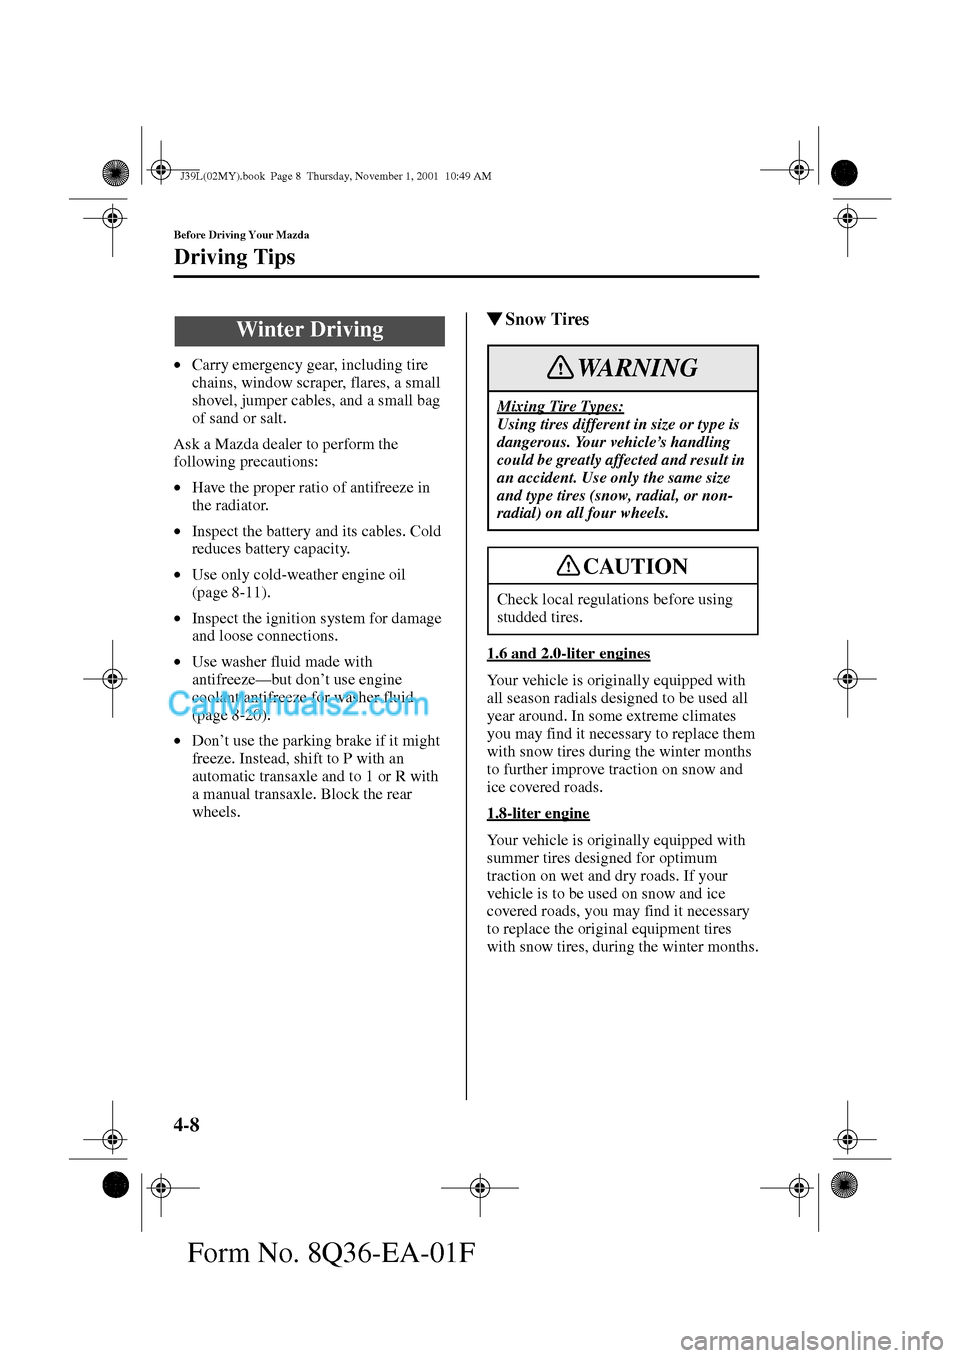 MAZDA MODEL PROTÉGÉ 2002  Owners Manual (in English) 4-8
Before Driving Your Mazda
Driving Tips
Form No. 8Q36-EA-01F
•Carry emergency gear, including tire 
chains, window scraper, flares, a small 
shovel, jumper cables, and a small bag 
of sand or sal